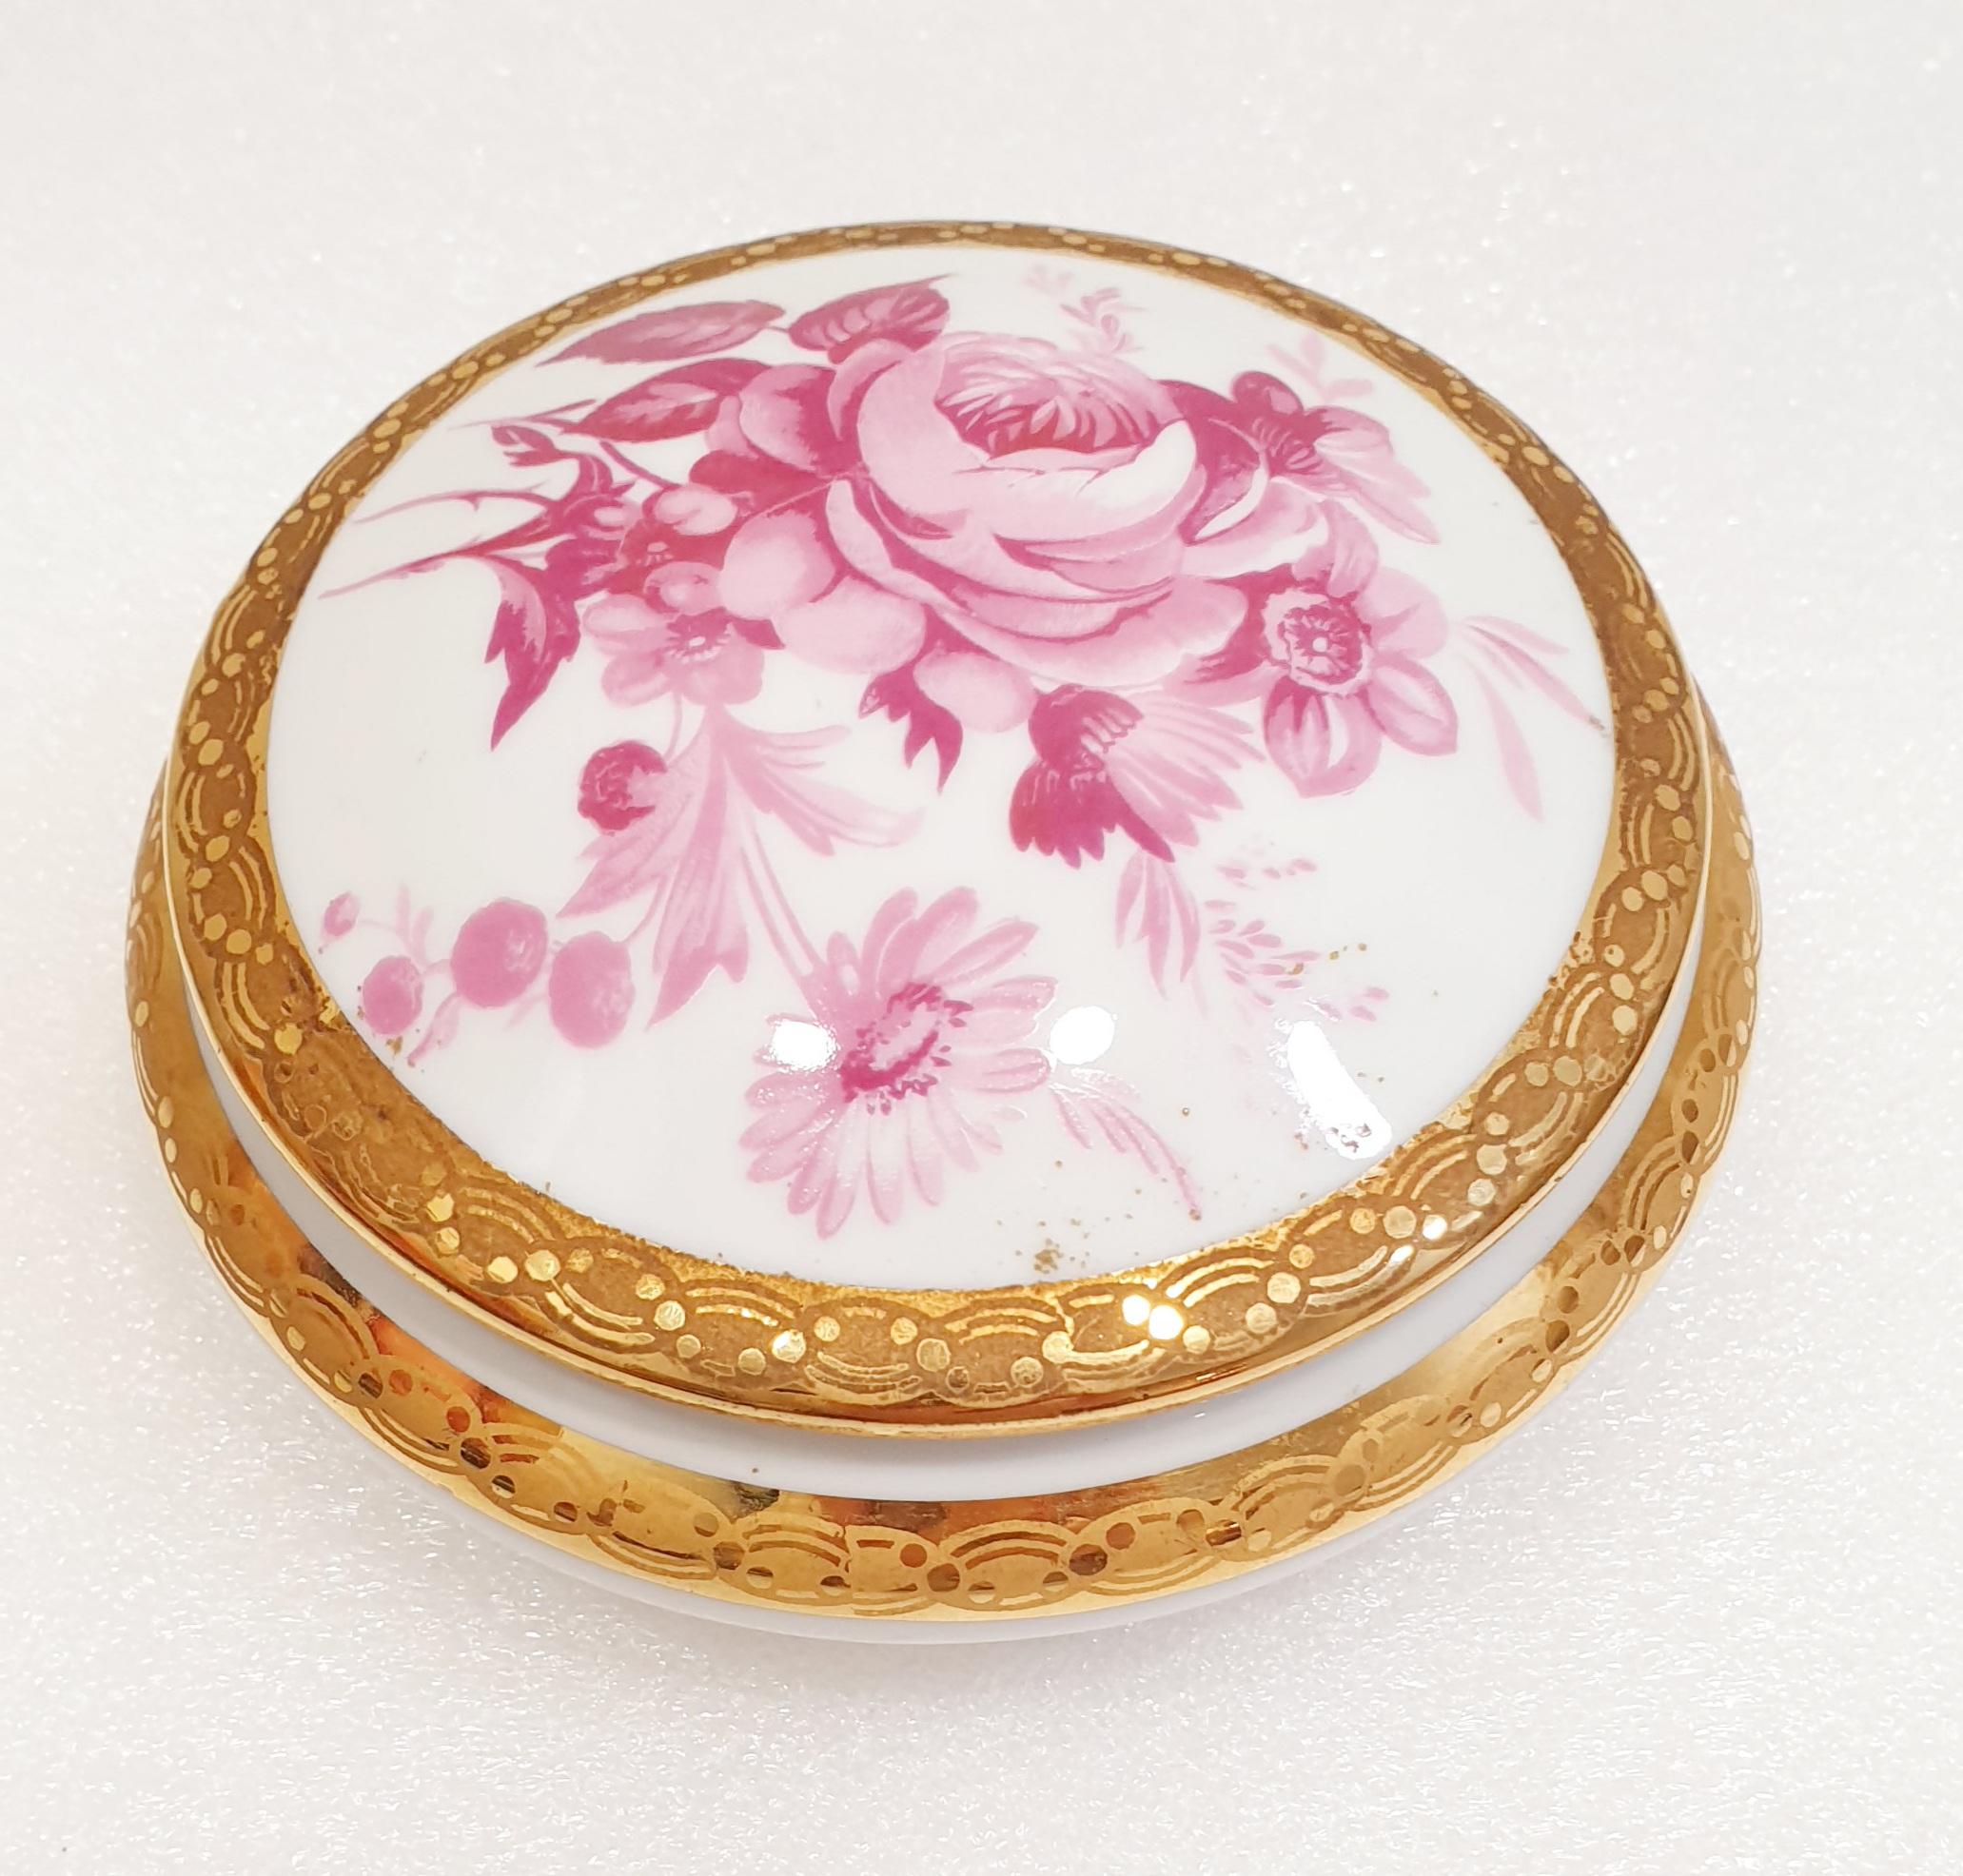 Porcelain De Limoges France Trinket Box 22k gold Hand applied accent
Very nice De Limoges porcelain trinket box. Charmingly decorated with painted roses on the lid and embossed gold band on the bowl.
Perfect gift for your special